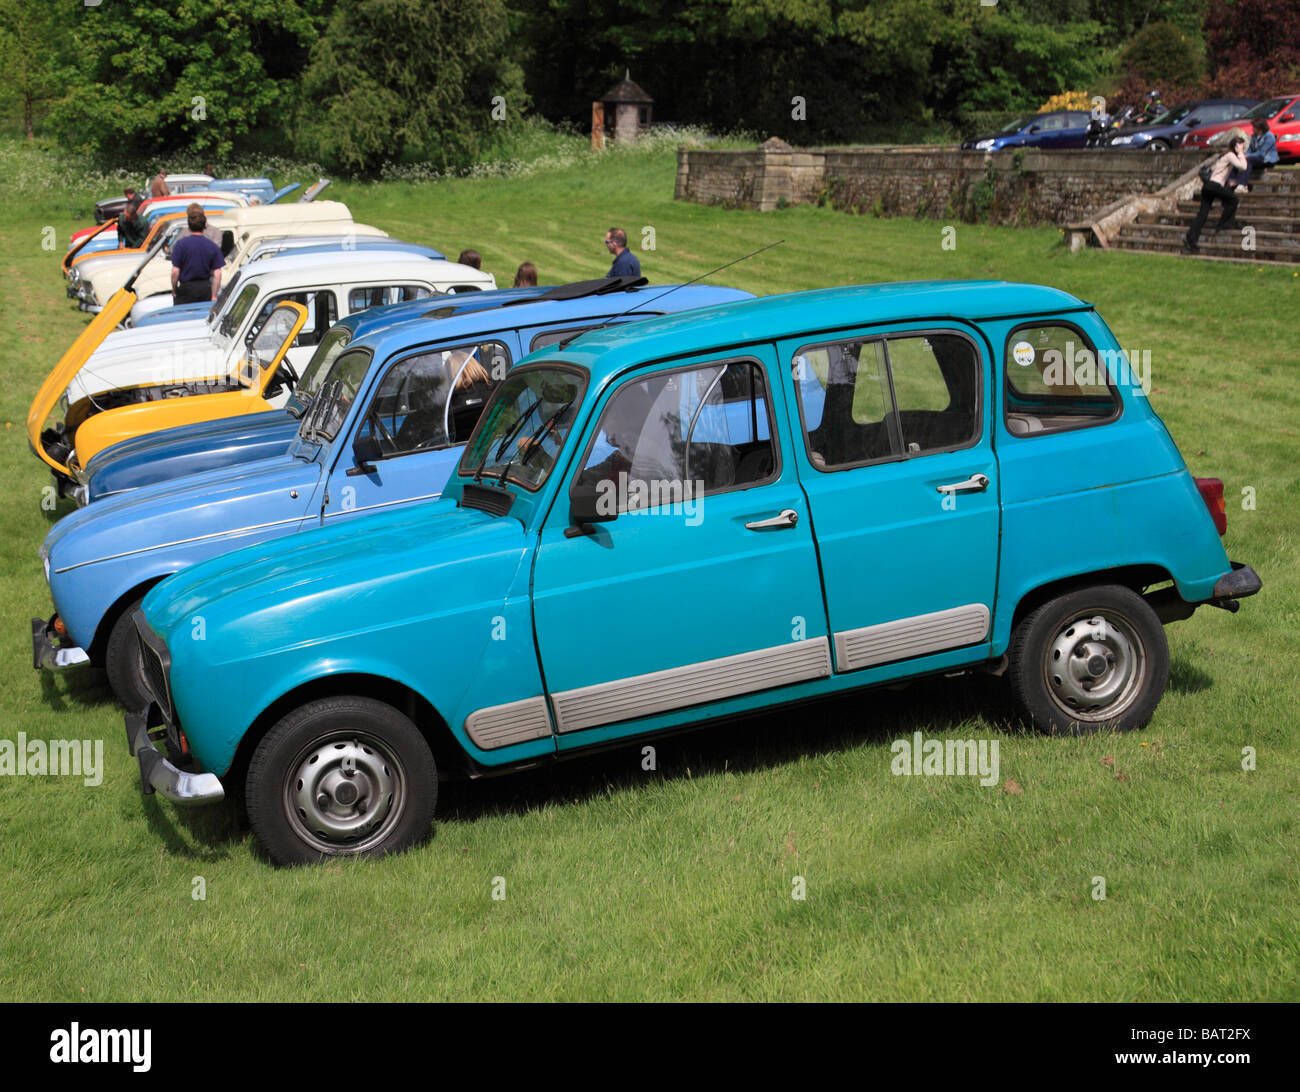 The Renault 4 owners club meeting at Squerryes Court, Westerham, Kent, England, UK. Stock Photo